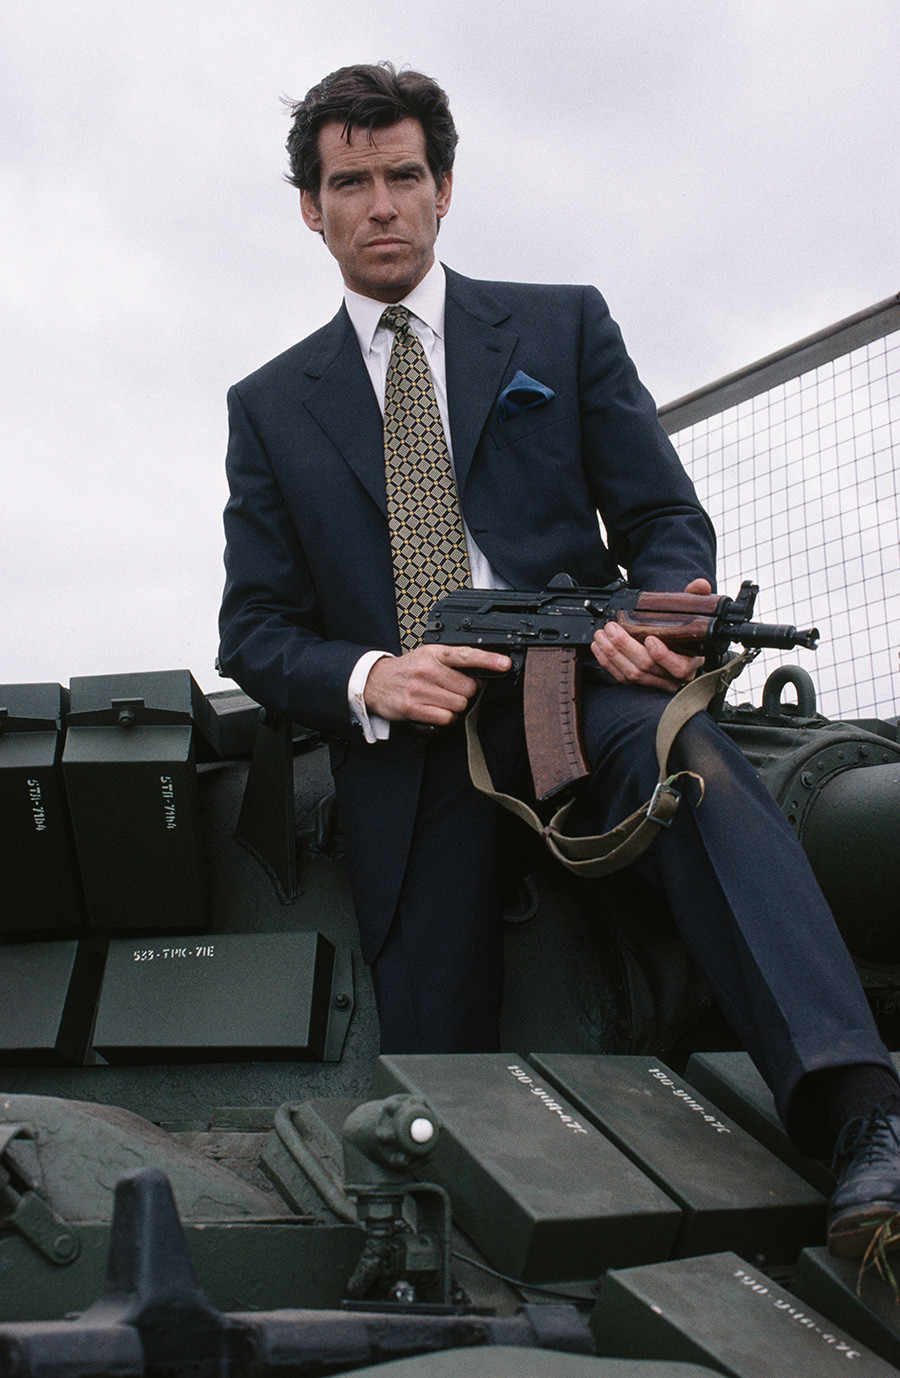 Pierce Brosnan with an AK in the 'Golden Eye’ movie from the James Bond series. 